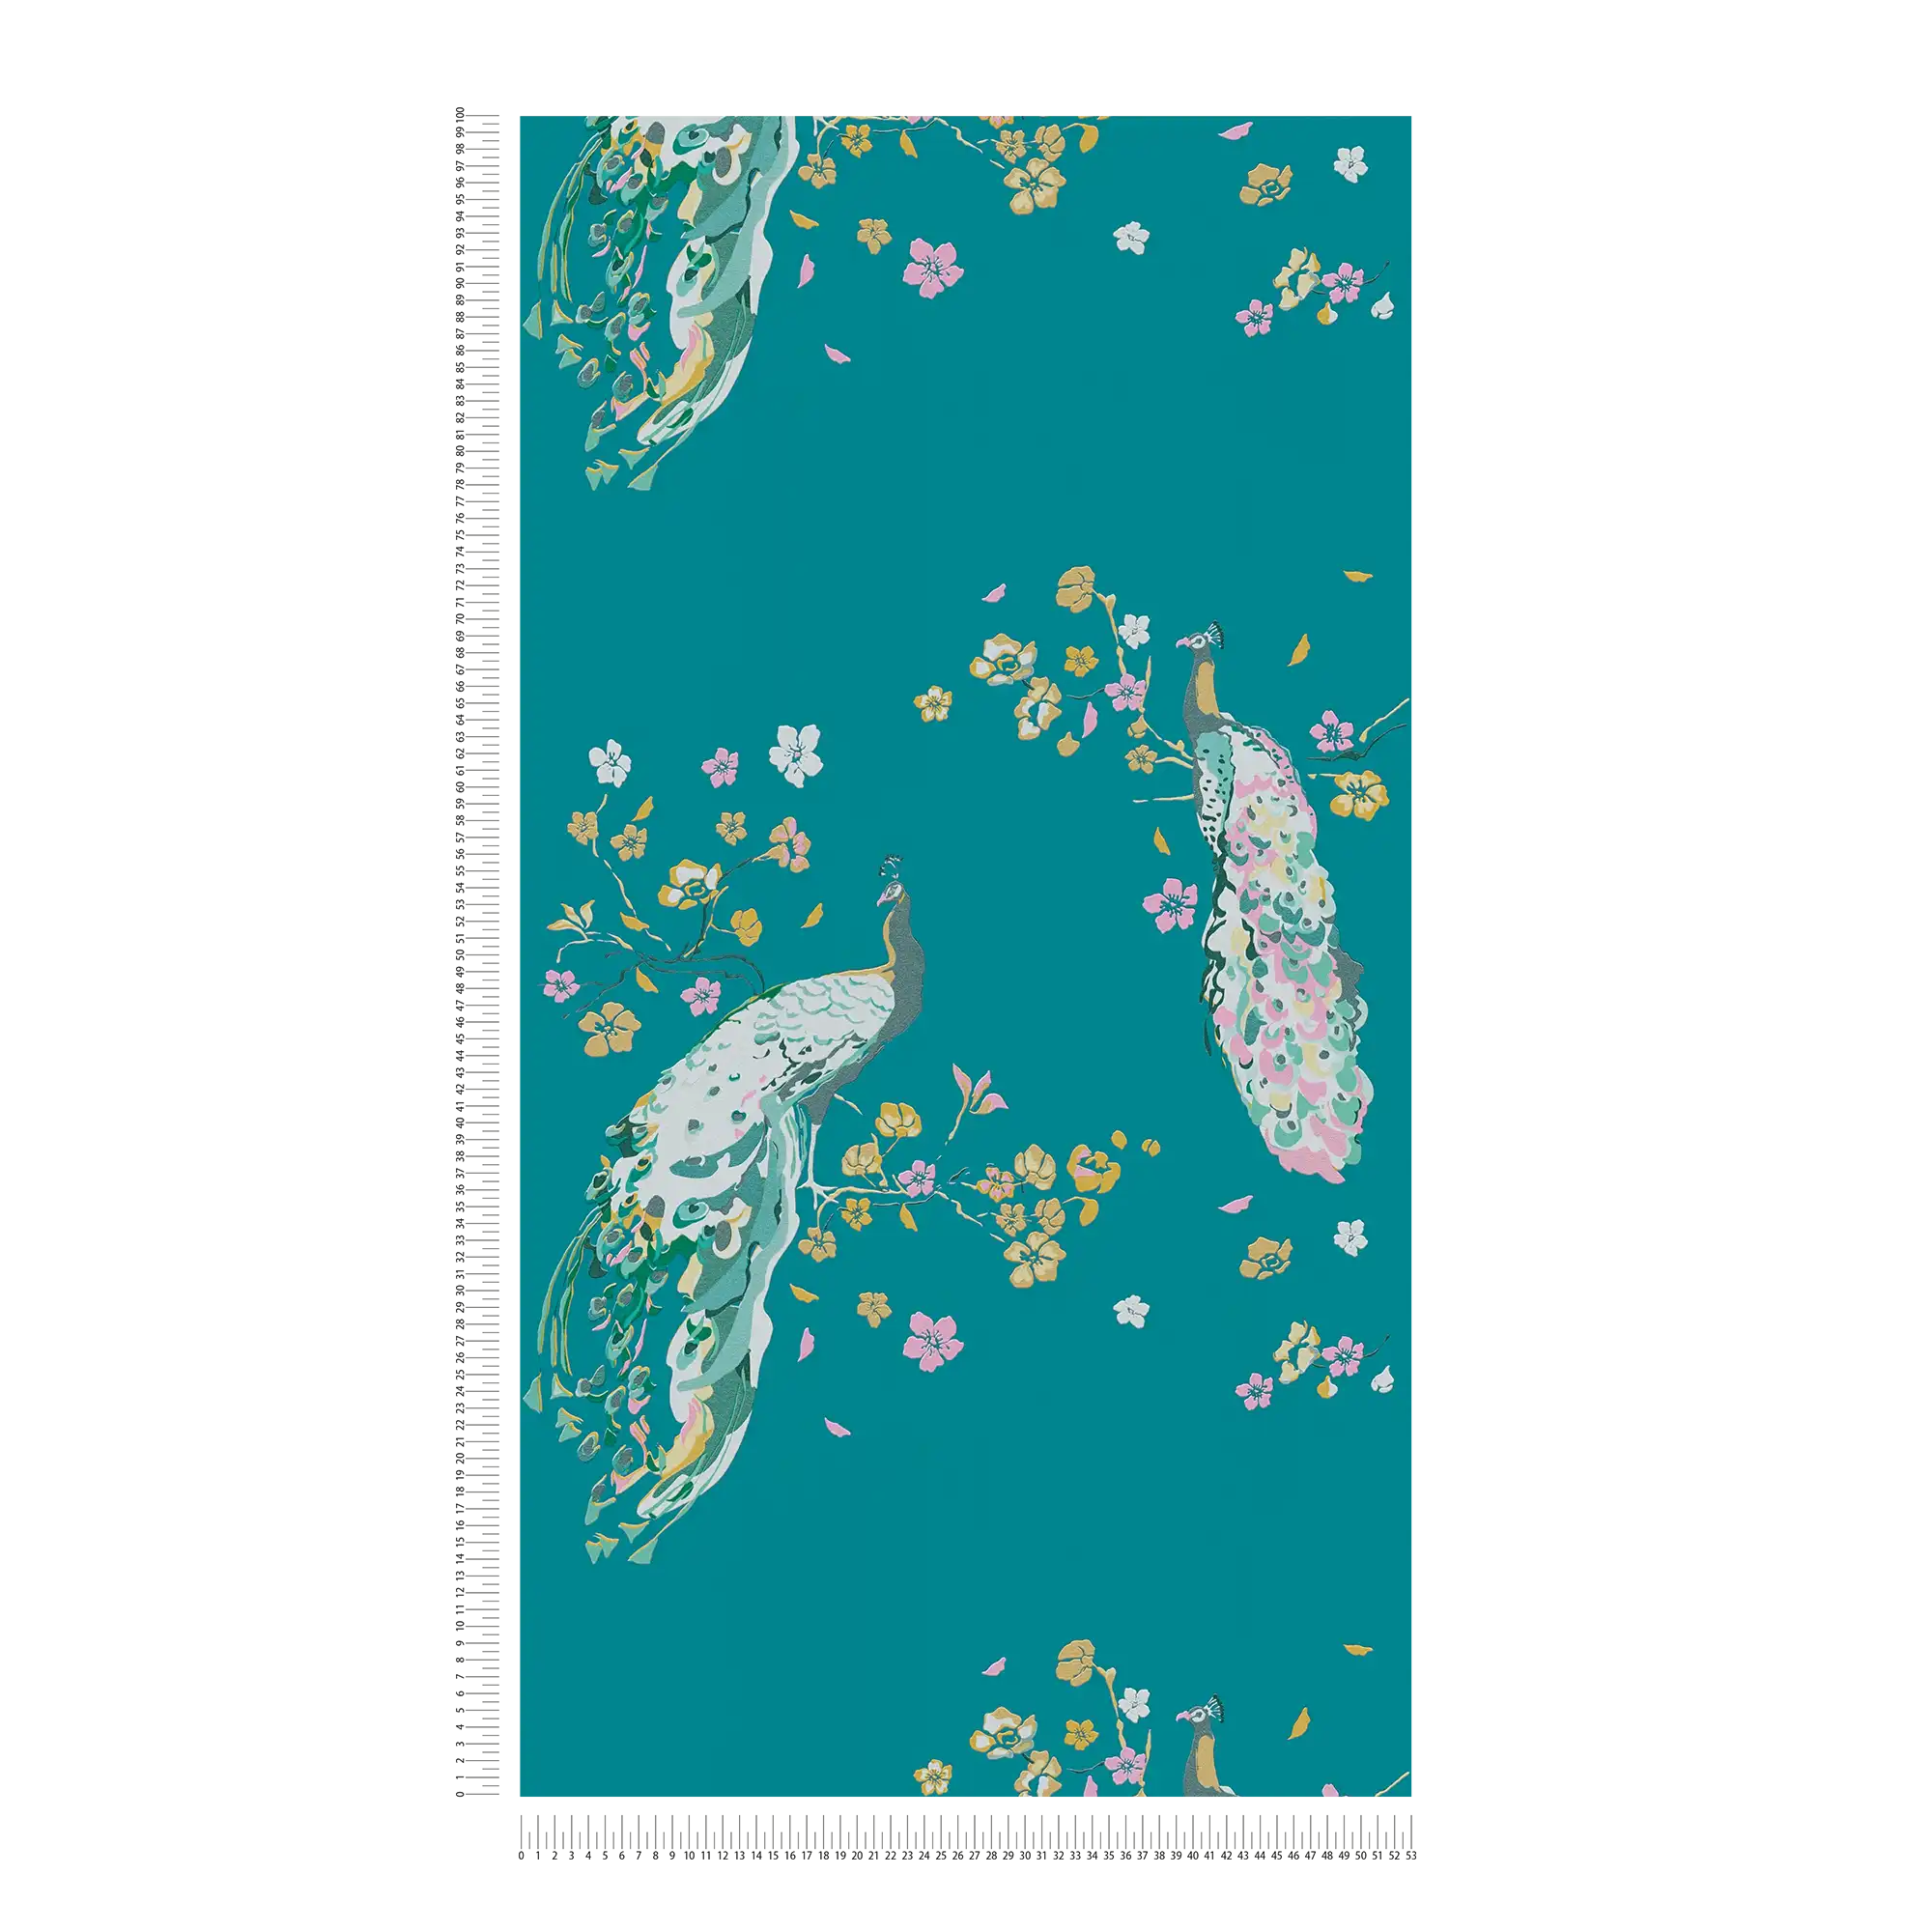             Peacock pattern wallpaper with glossy effect - turquoise, yellow, colourful
        